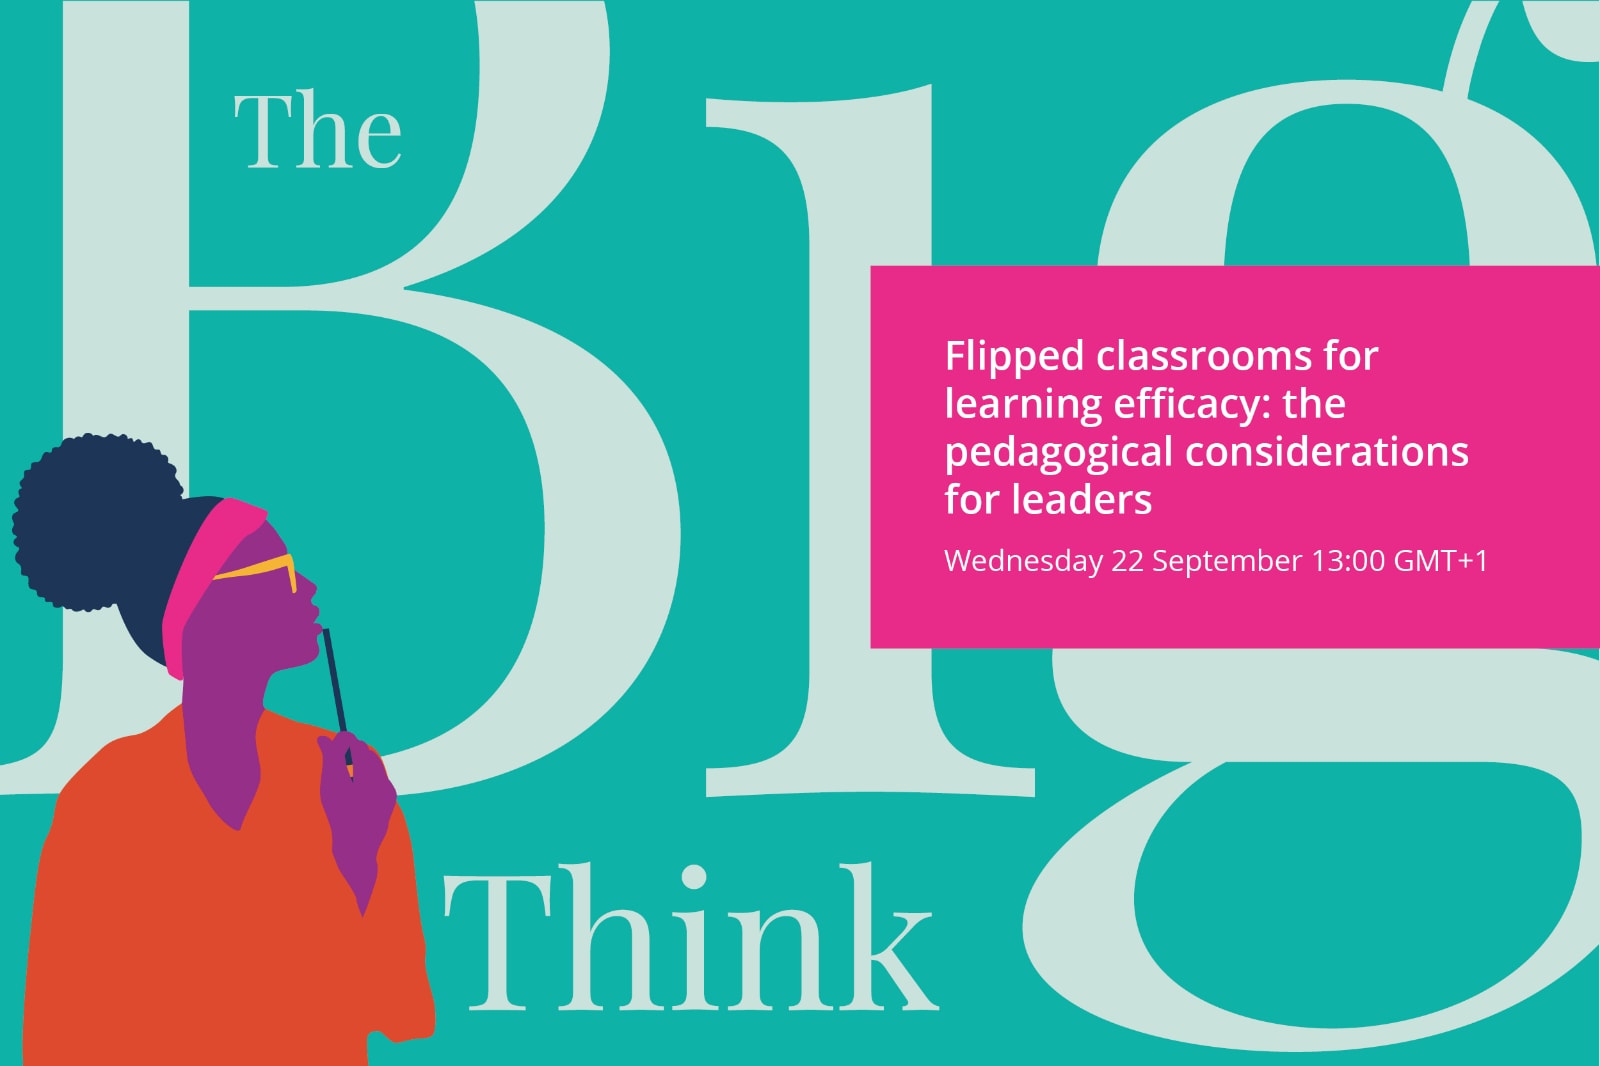 The Big Think: Flipped classrooms for learner efficacy